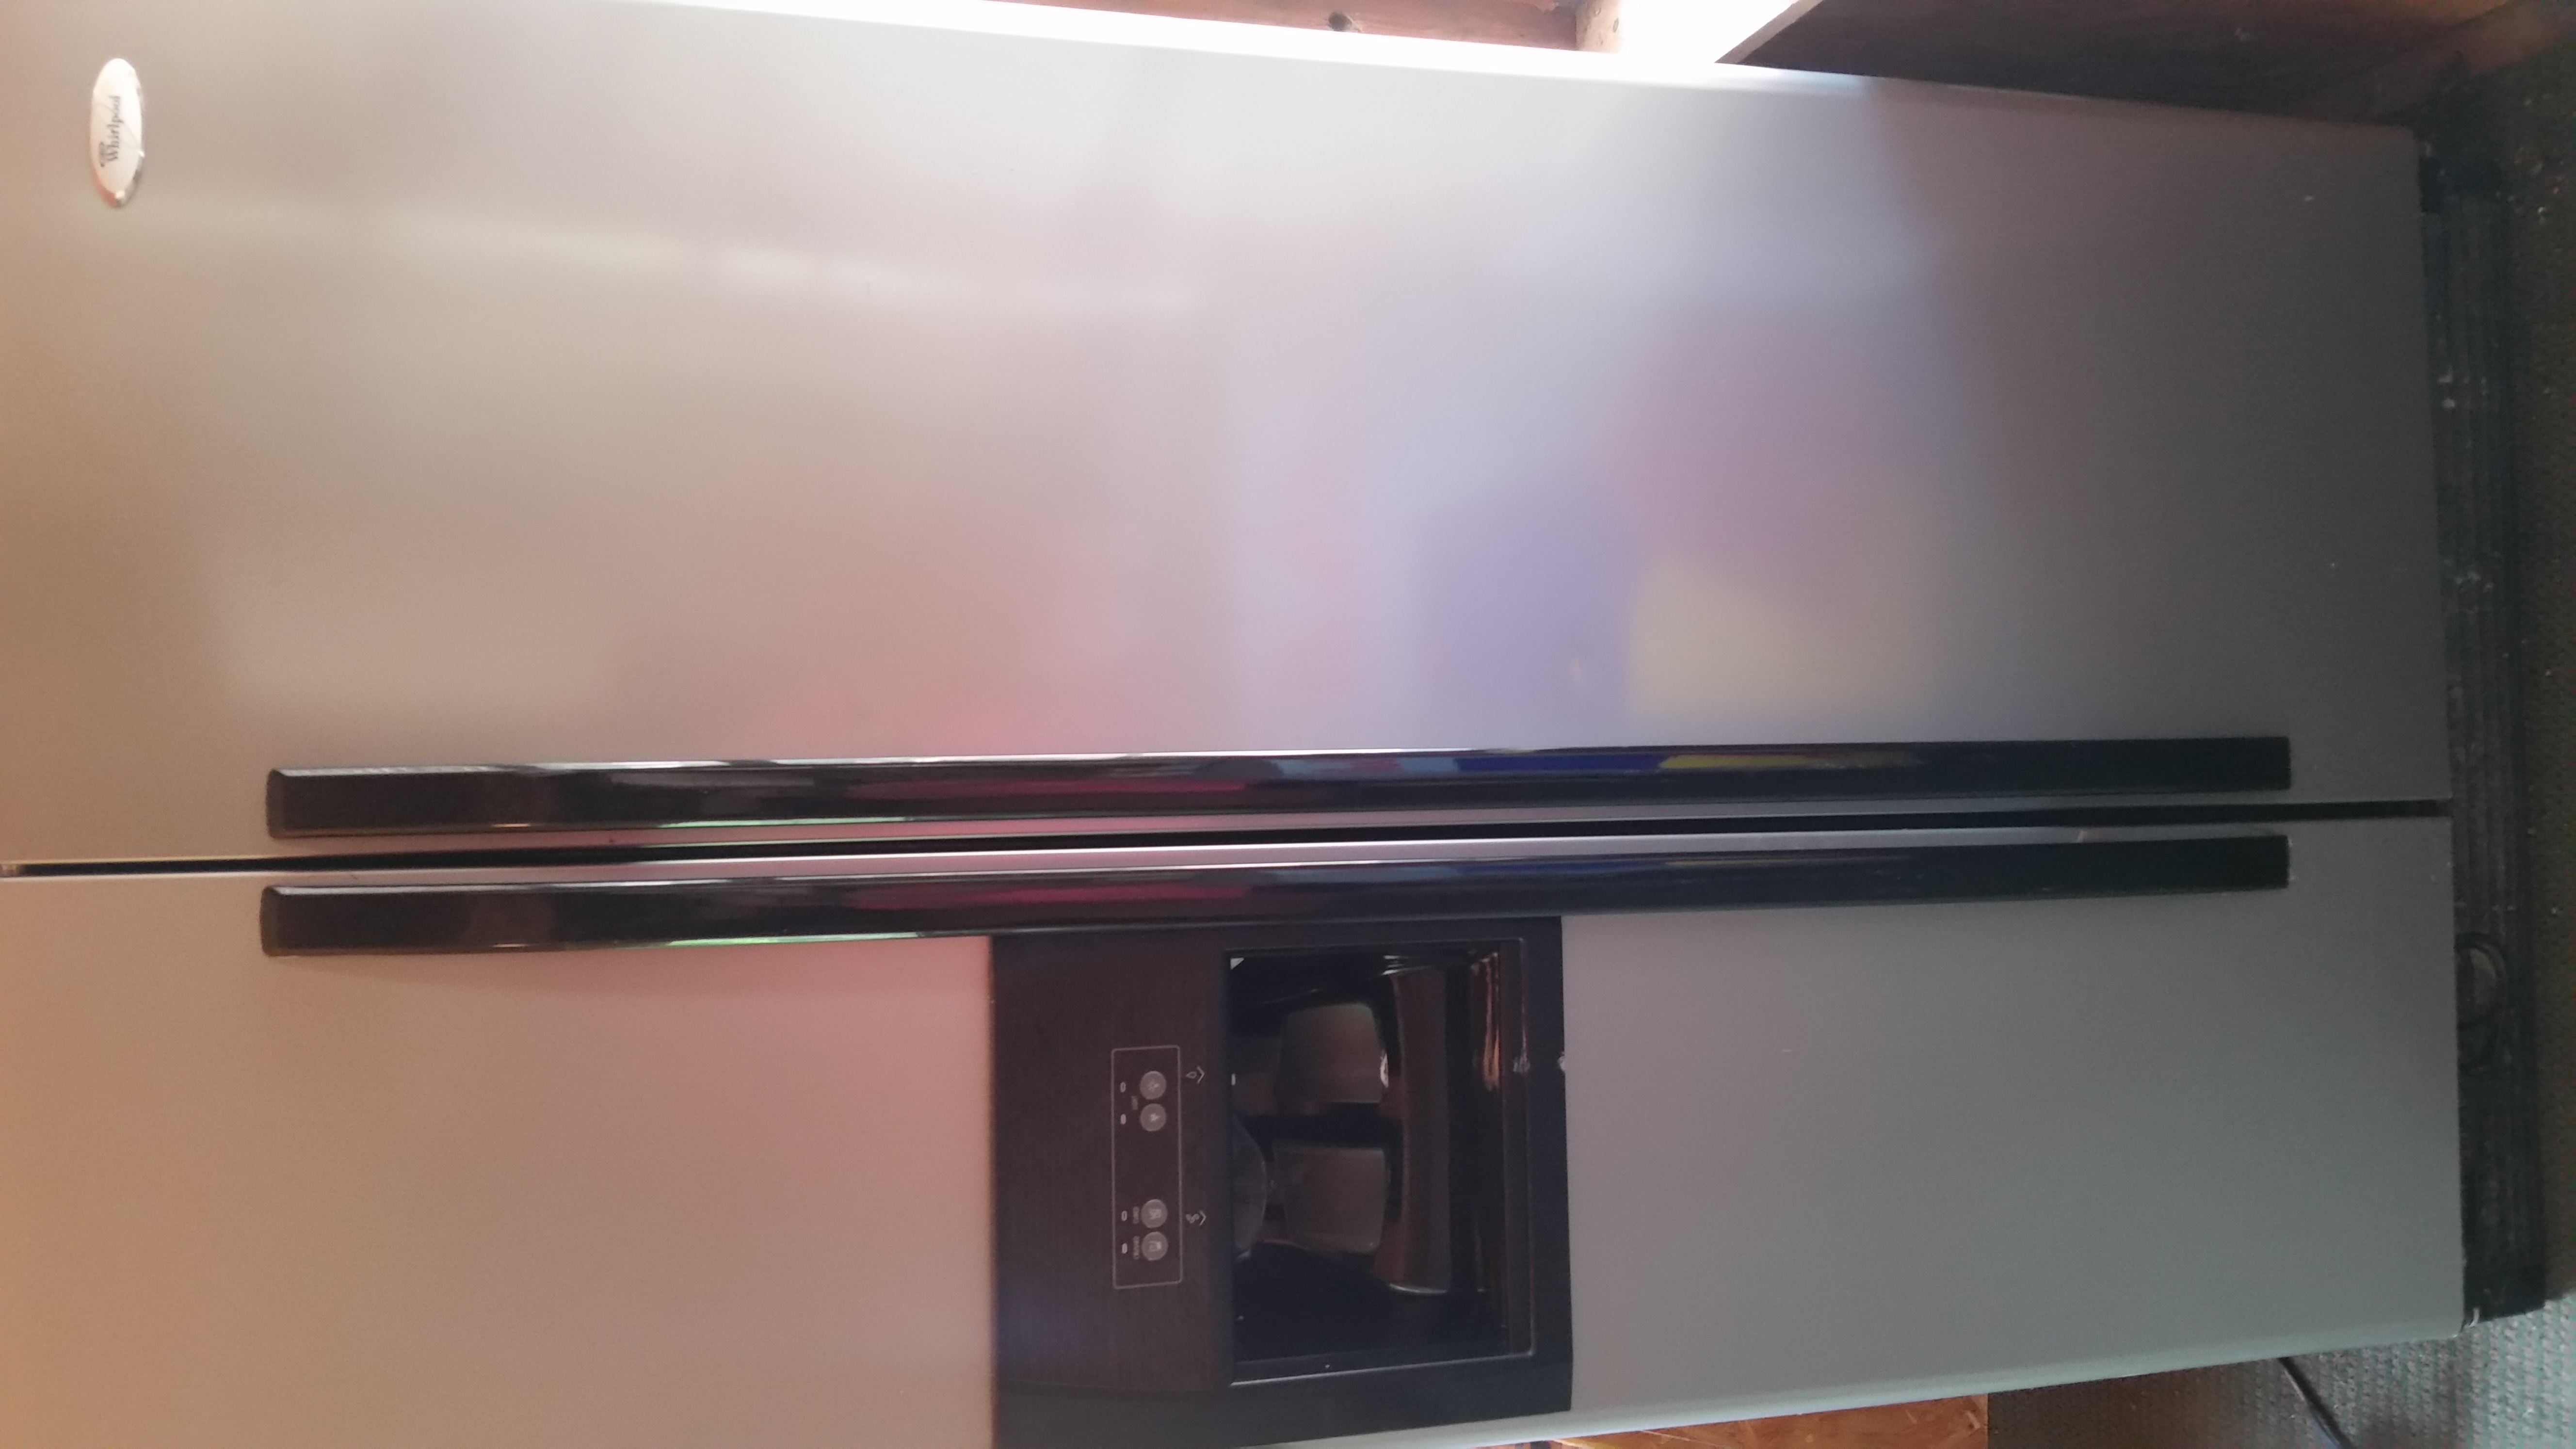 Whirlpool Refrigerator for sale in Point TX